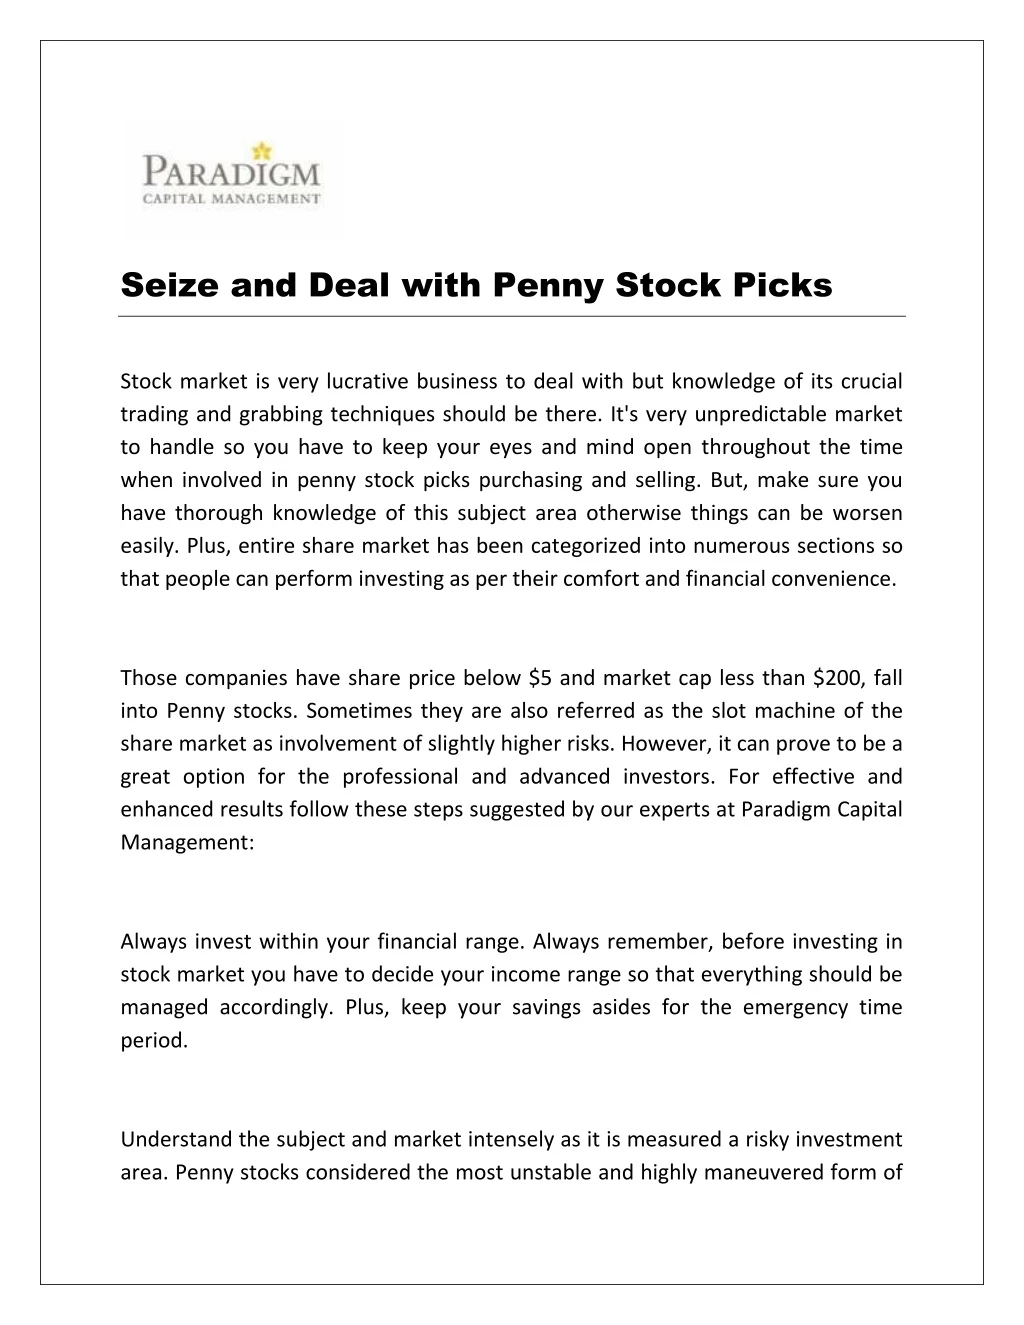 seize and deal with penny stock picks